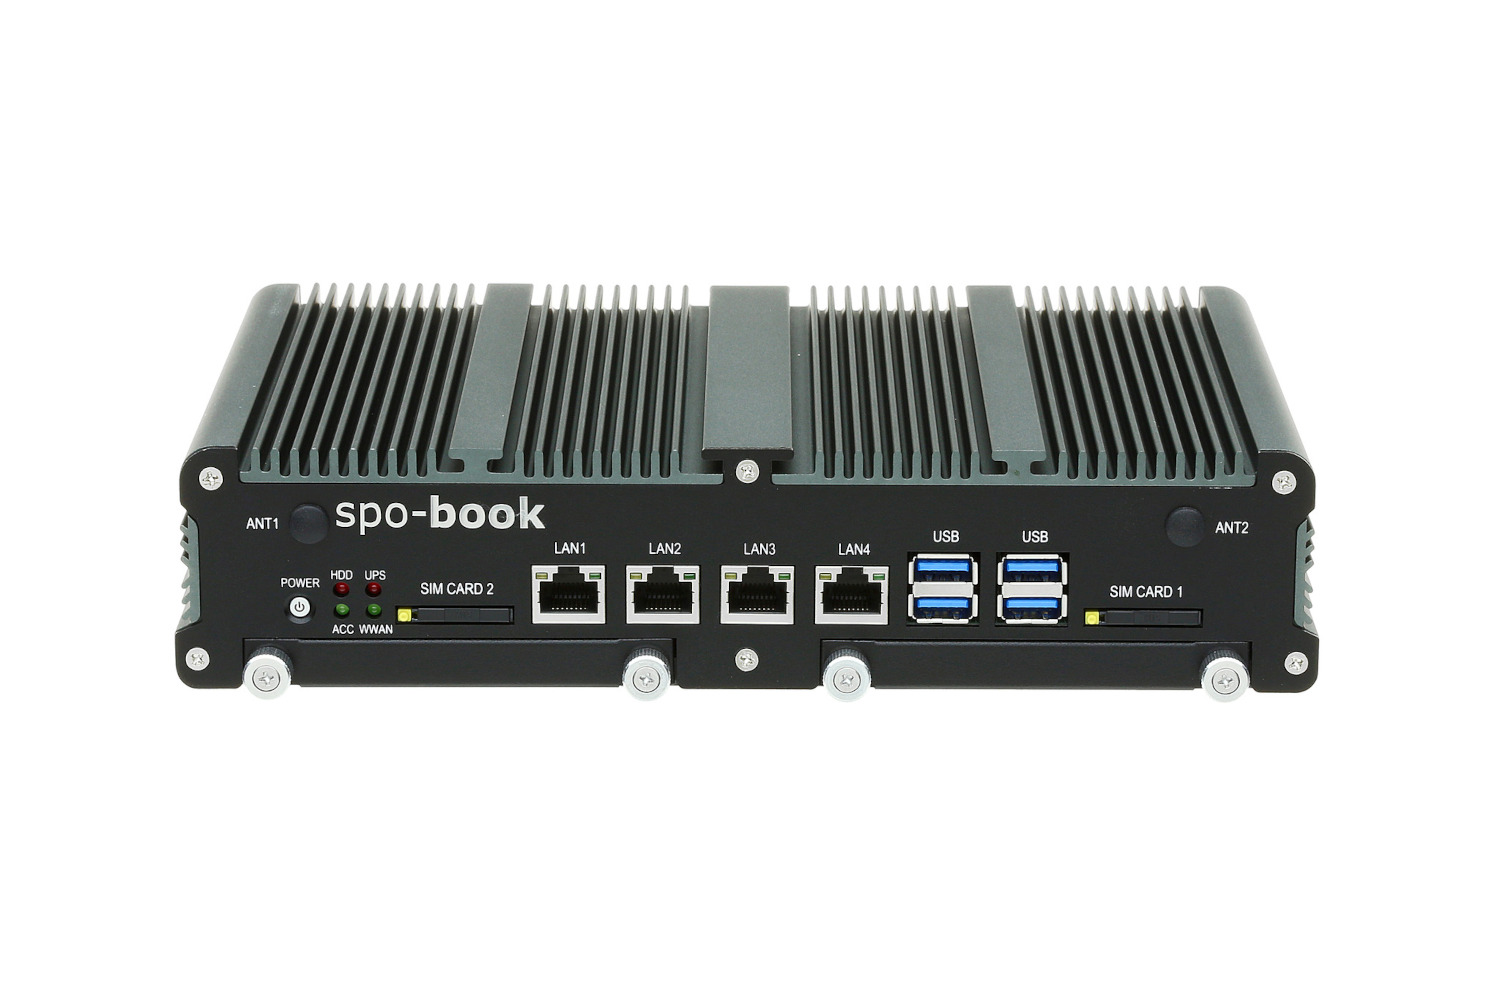 The MOVE QM77: A mini PC which can also be used as server